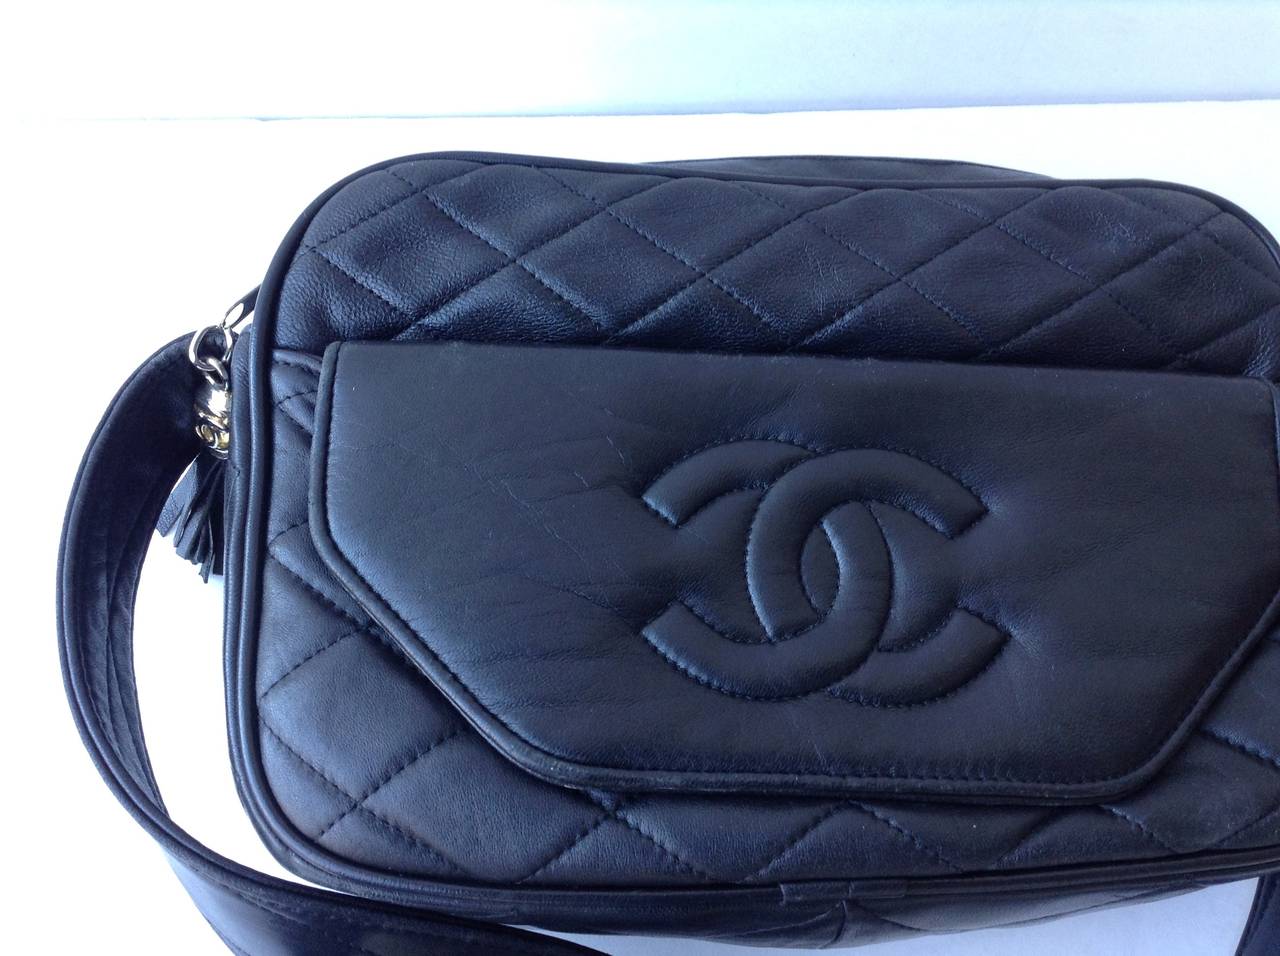 Chanel Black Leather Vintage Camera Bag In Good Condition For Sale In Westmount, Quebec